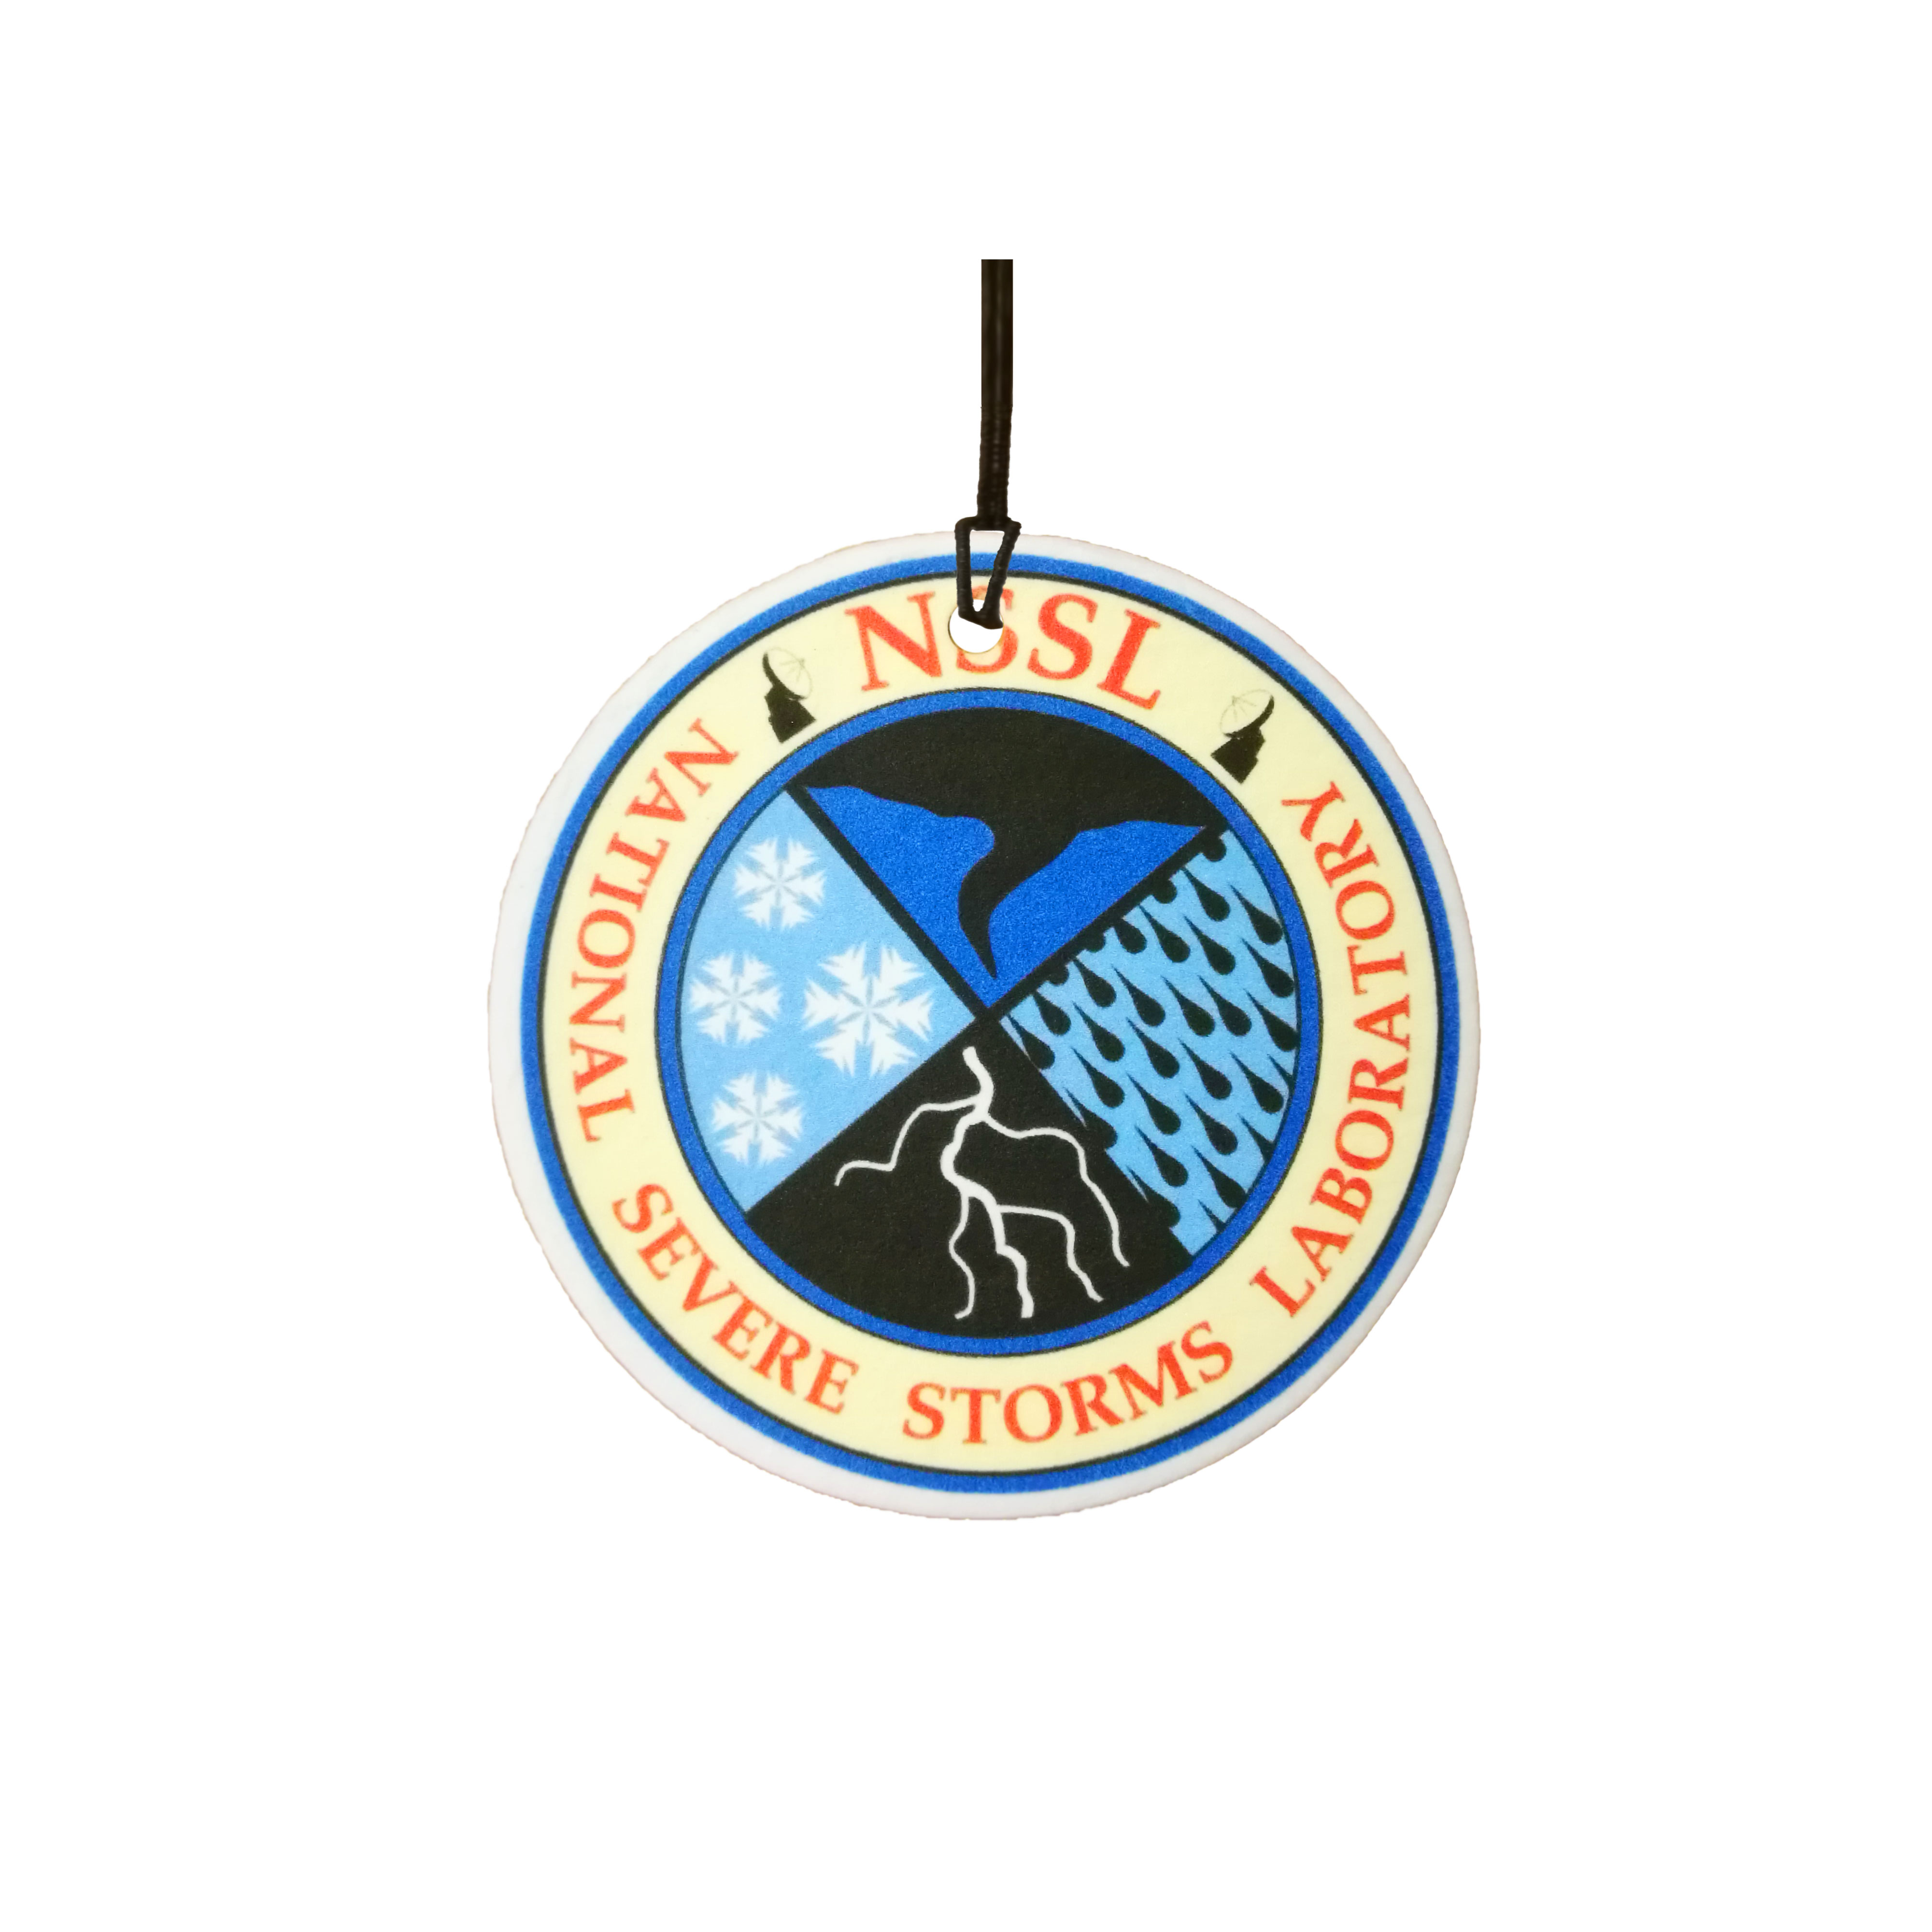 US National Severe Storms Laboratory NSSL Seal